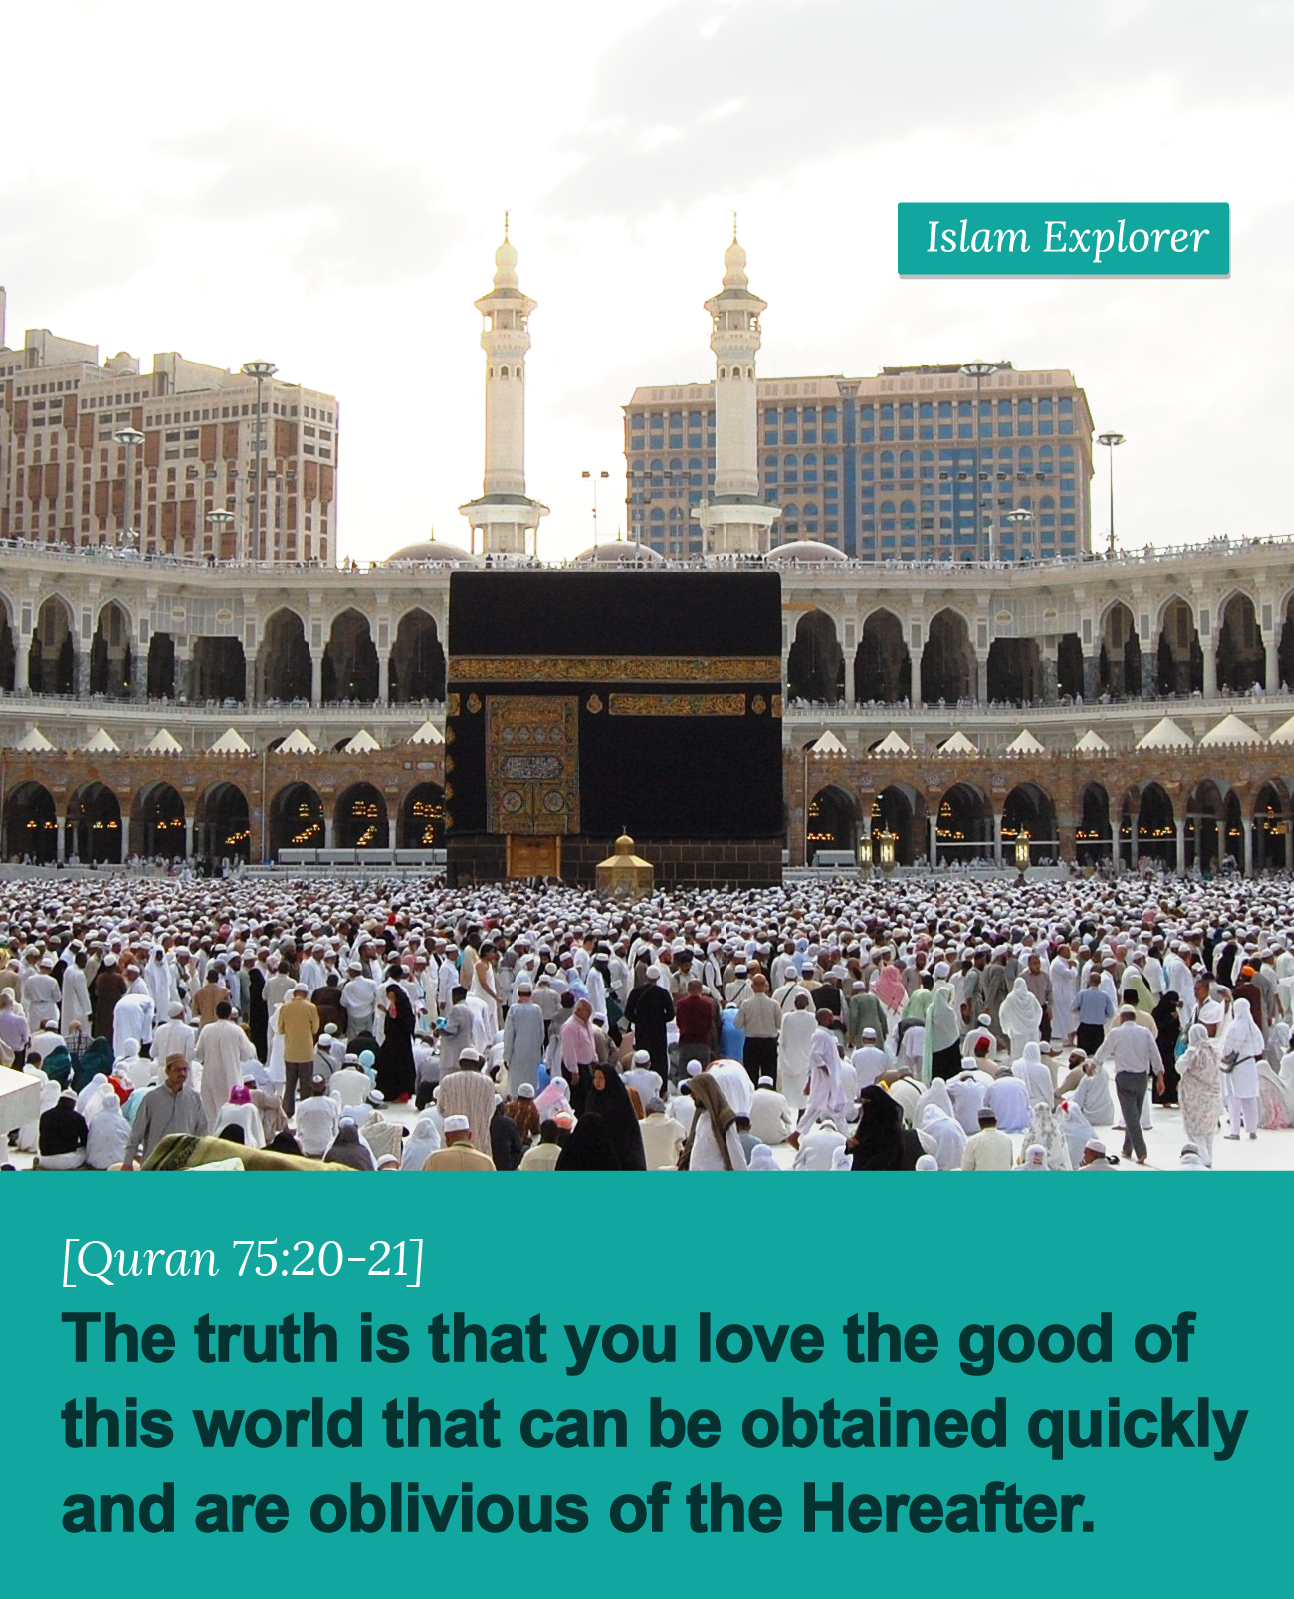 The truth is that you love the good of this world